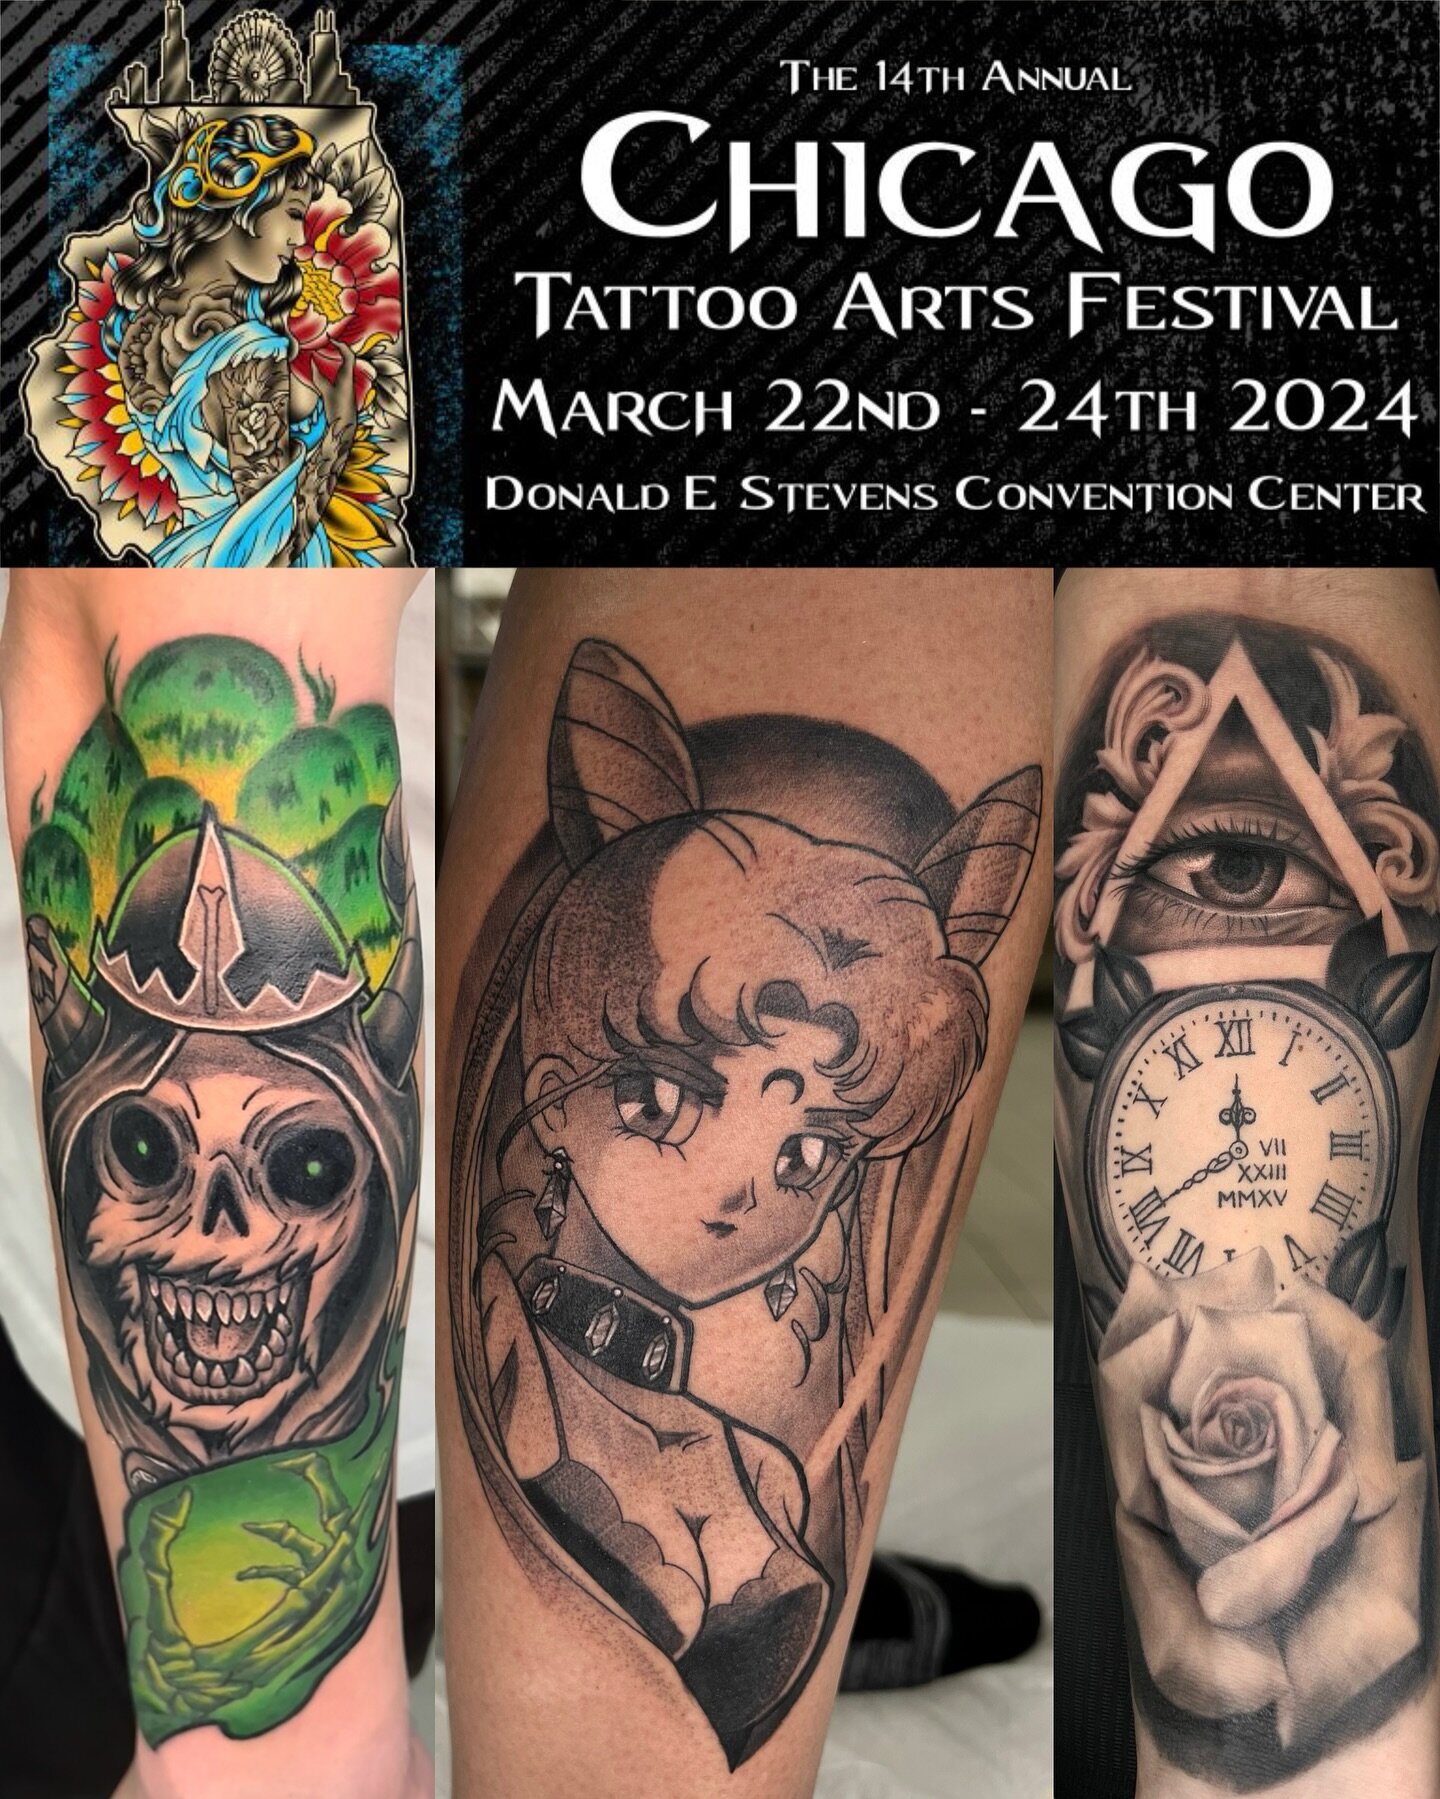 I&rsquo;ll be attending the Chicago Villain Arts Festival this year in March 22nd-24th with @deluxetattoochicago If you want to get tattooed there send me your ideas! I&rsquo;ll also have flash work available. DM me to book and I&rsquo;ll see you all